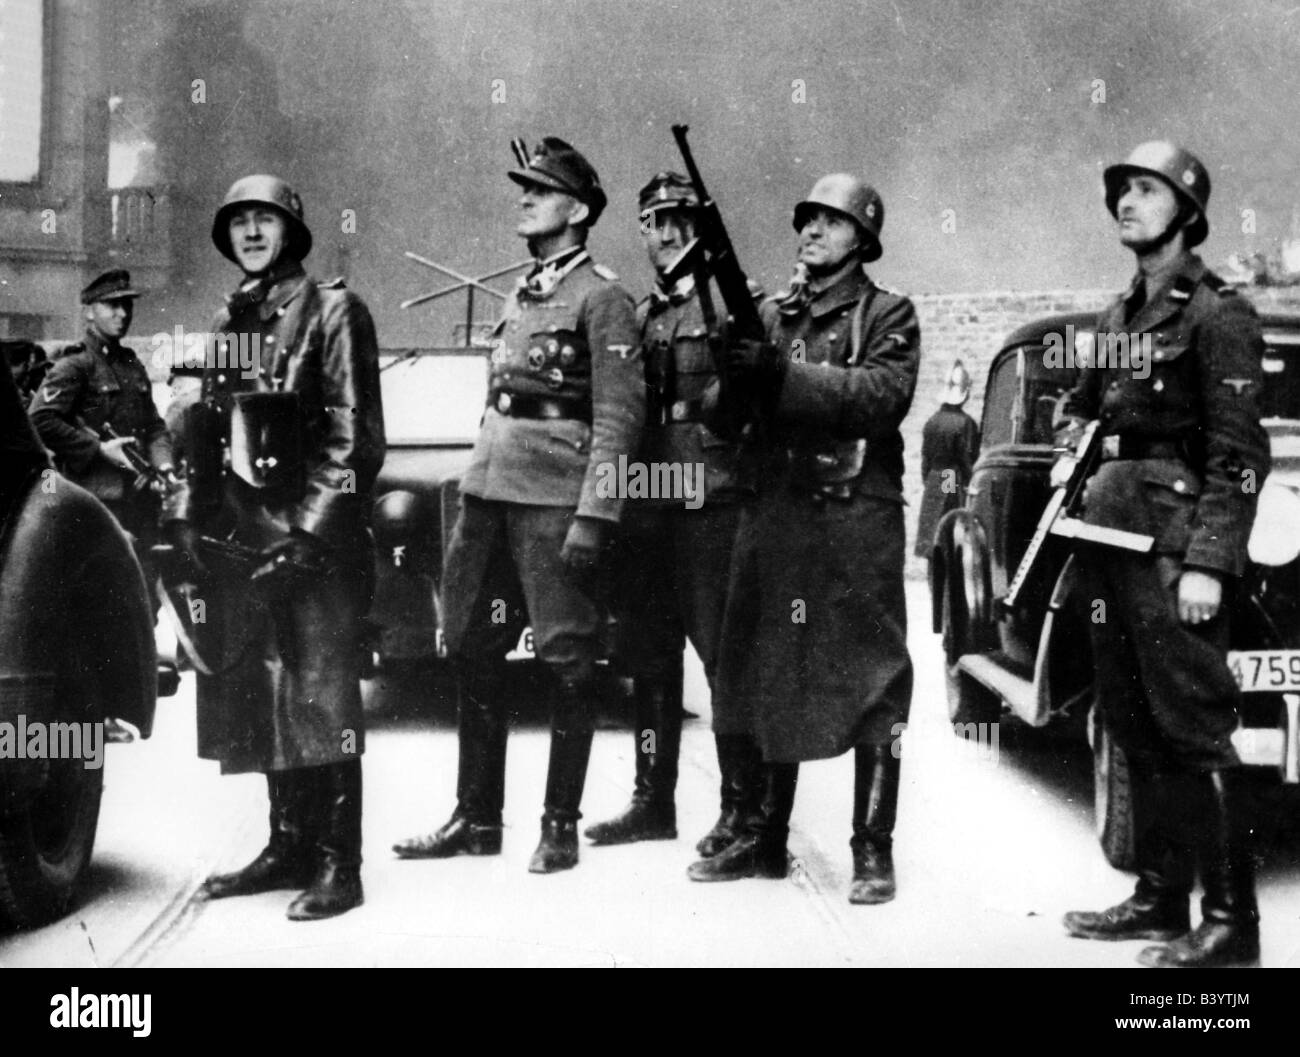 events, Second World War / WWII, Poland, German occupation, Warsaw Ghetto Uprising 19.4. - 16.5.1943, Stock Photo